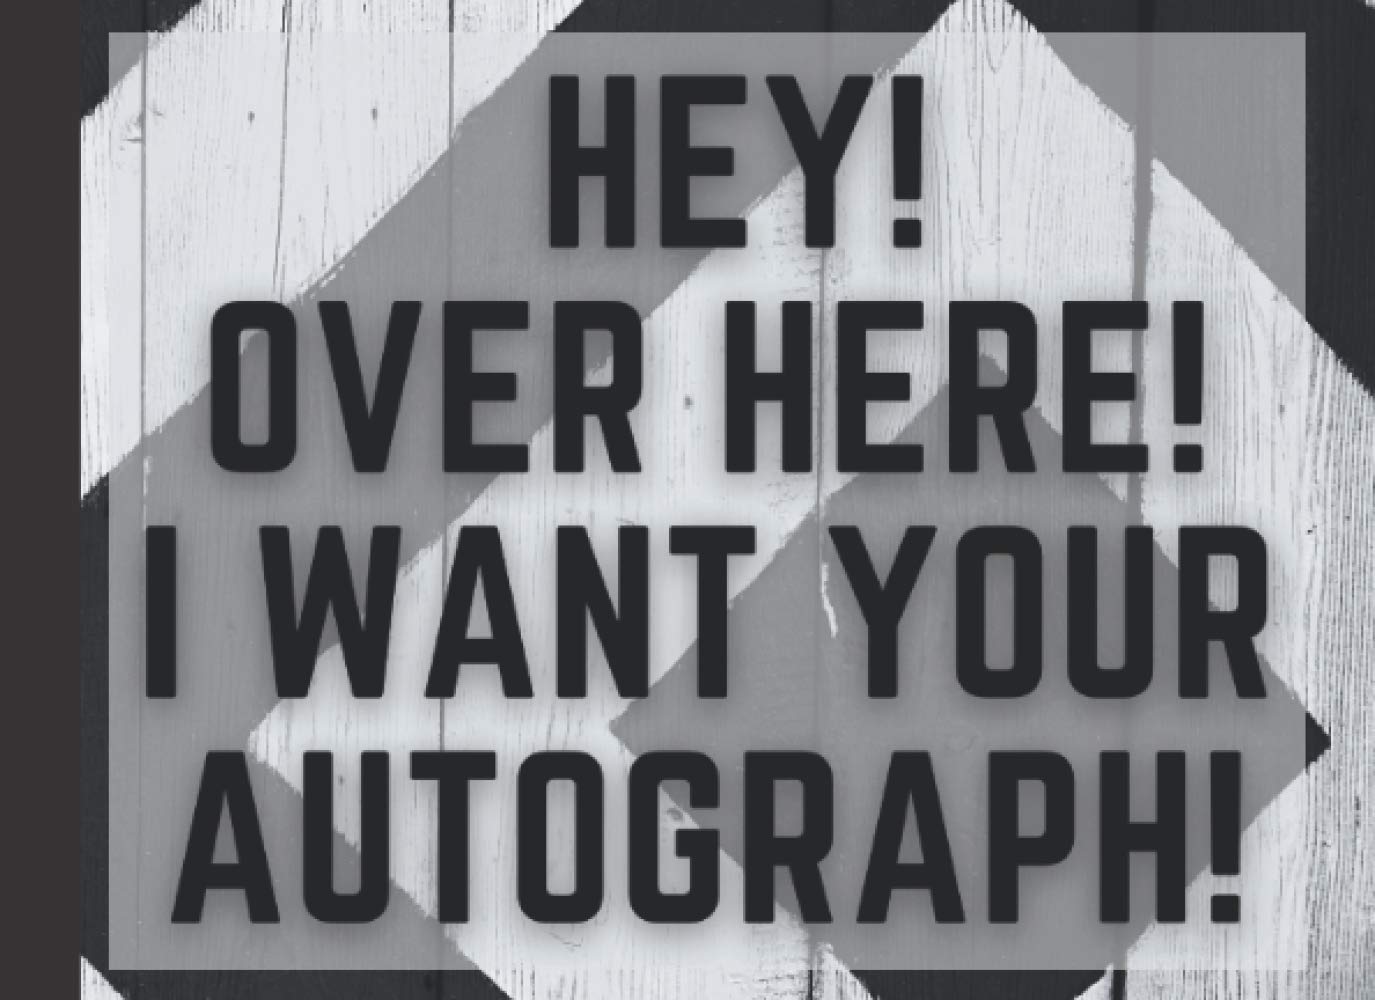 61ahYsXZcjL - Hey Over here I want your autograph: Autograph Book | Signatures Scrapbook | Celebrity Autograph Book | For Kids and Adult | Blank Unlined Space | ... for Autograph Hunters |Keepsake Memory Book